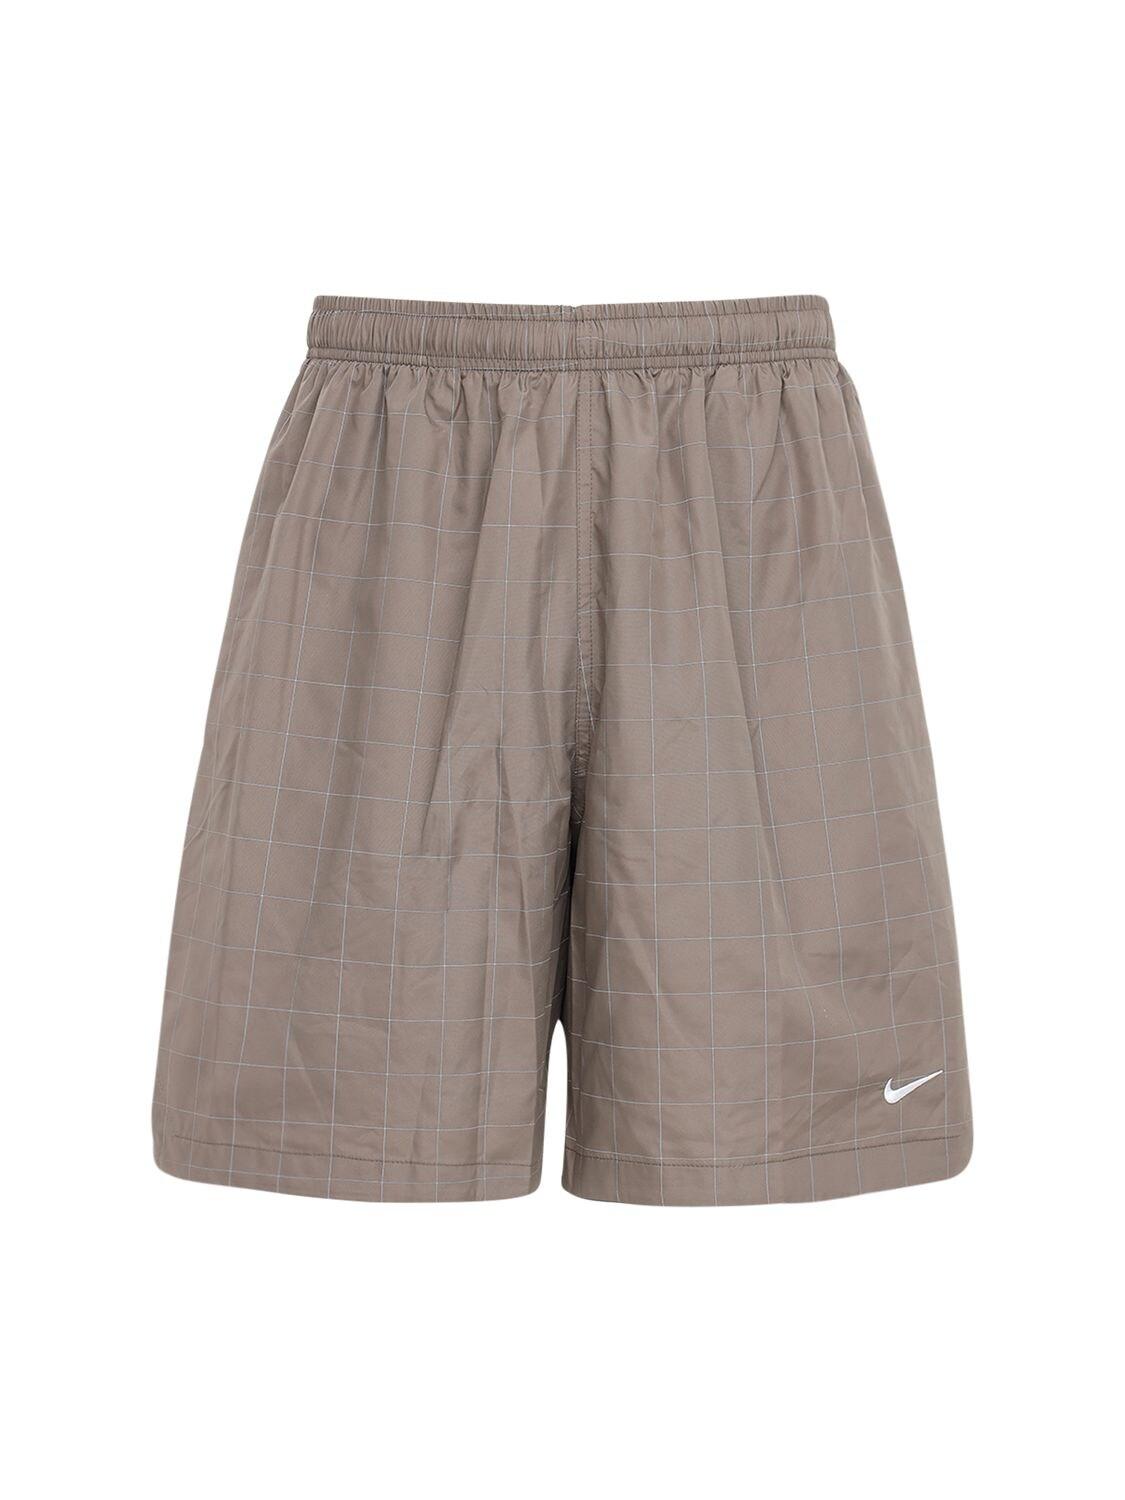 Nike Lab Nrg Flash Shorts in Olive Grey (Gray) for Men | Lyst